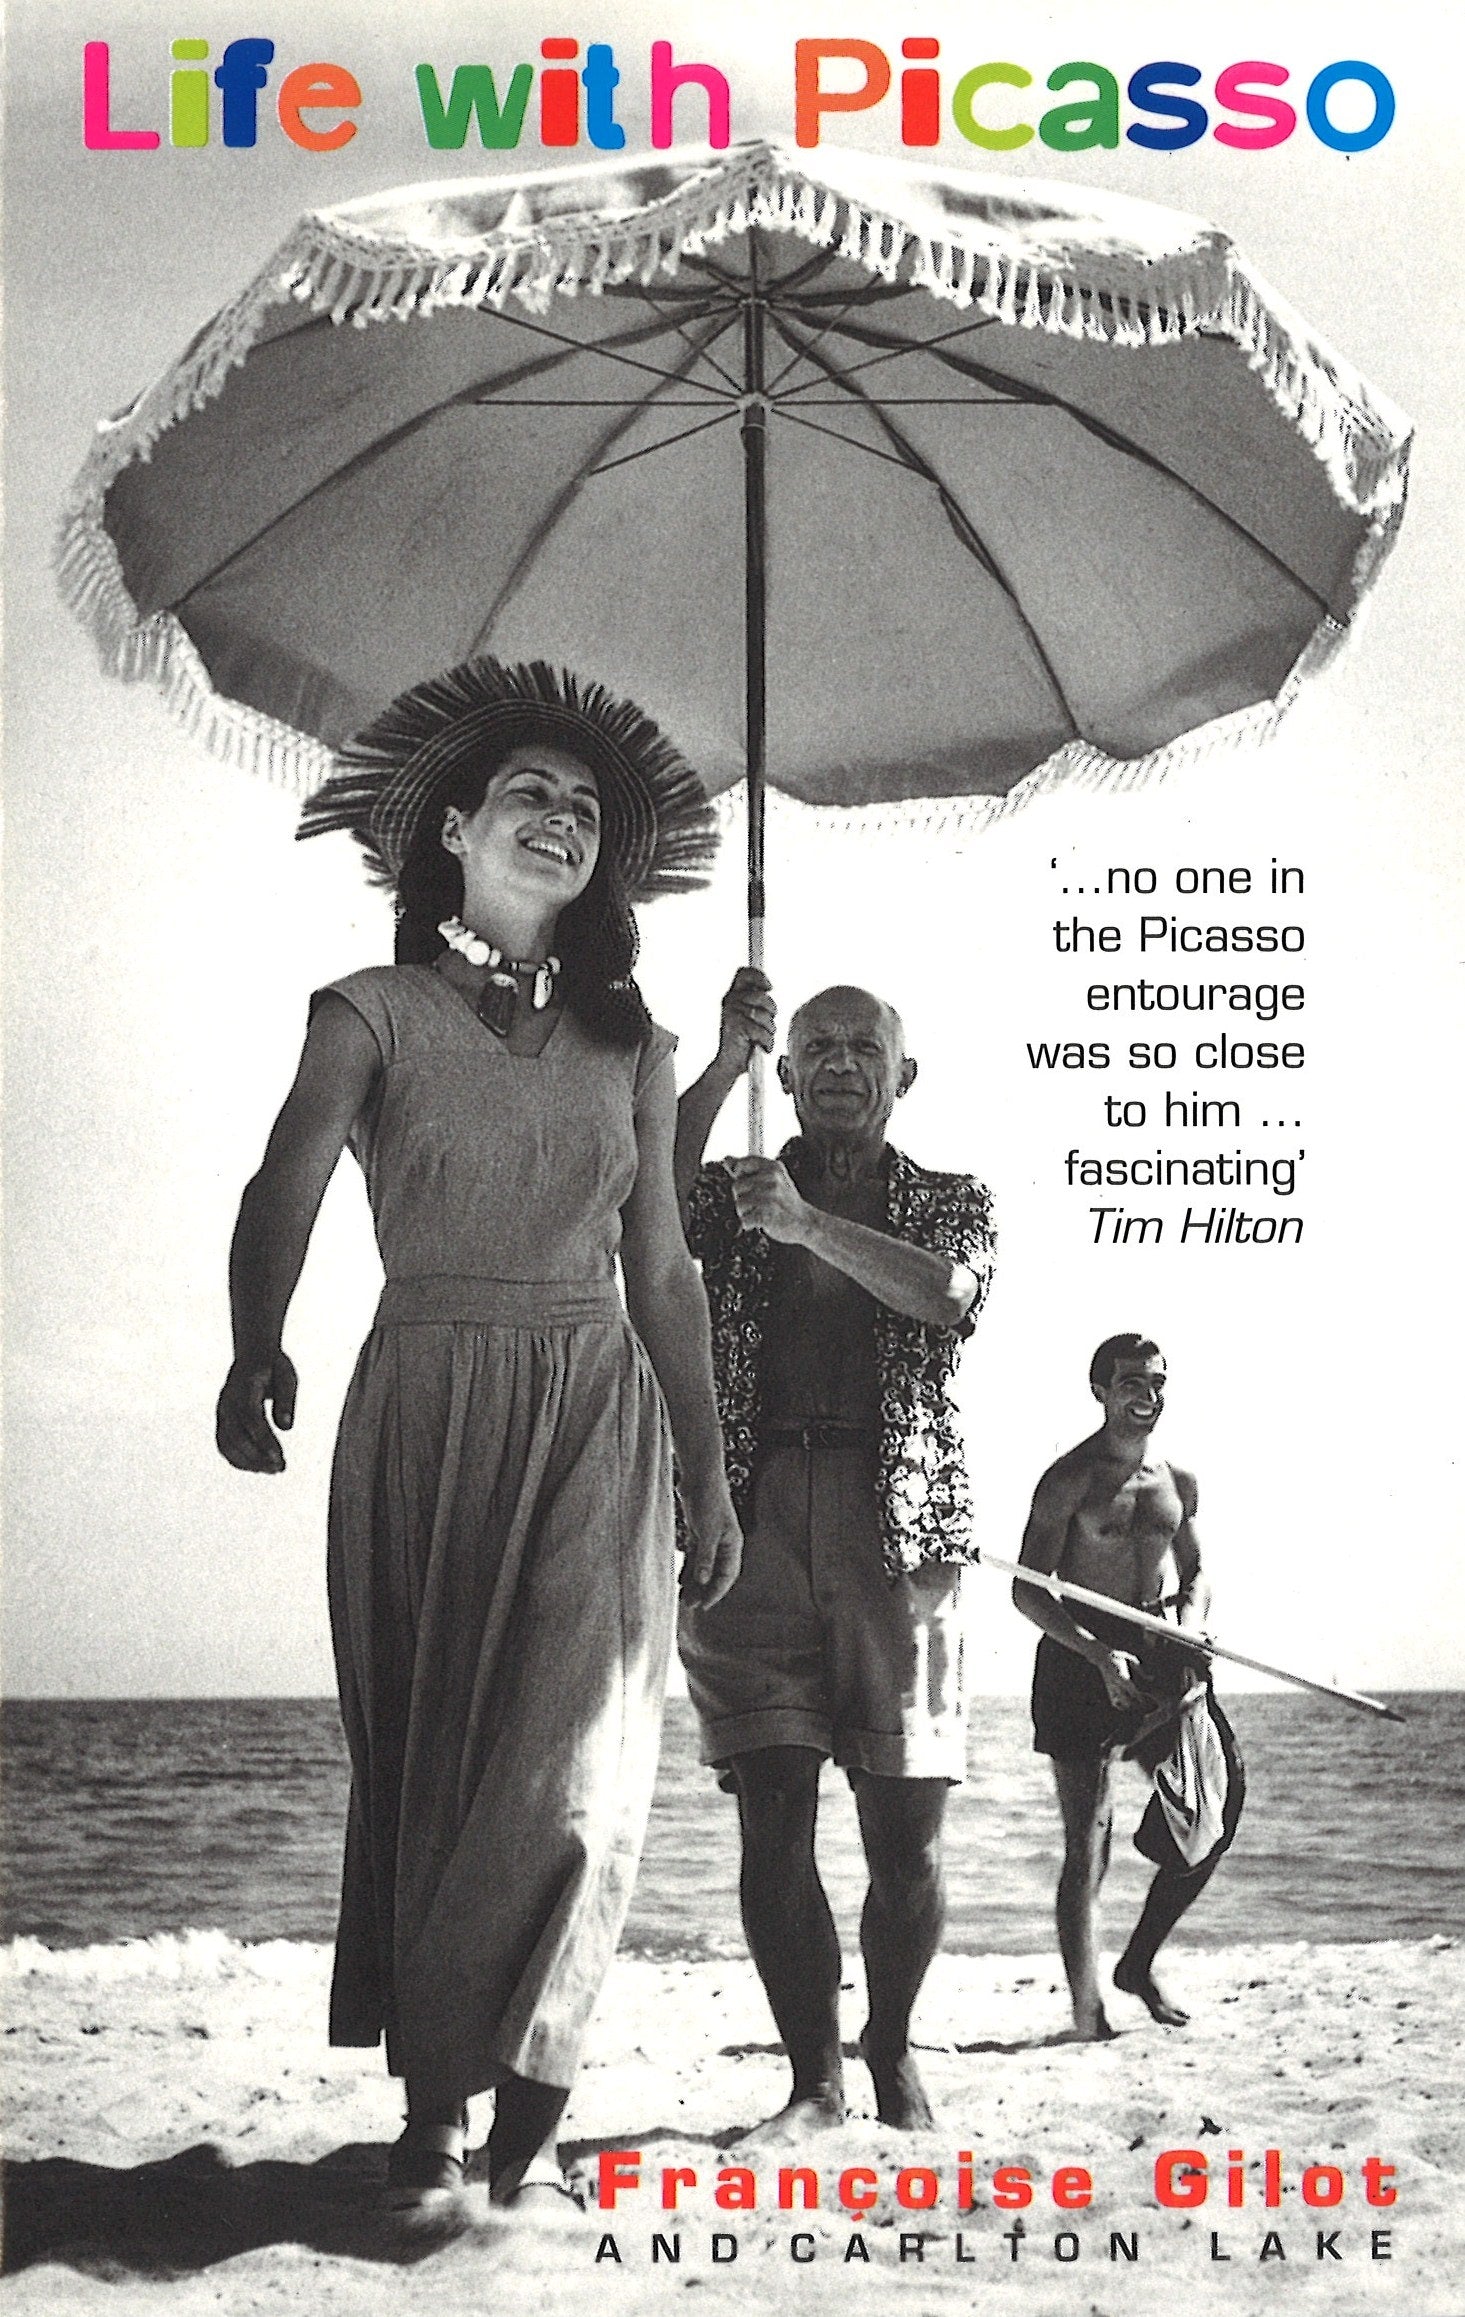 Life With Picasso by Francoise Gilot, Carlton Lake